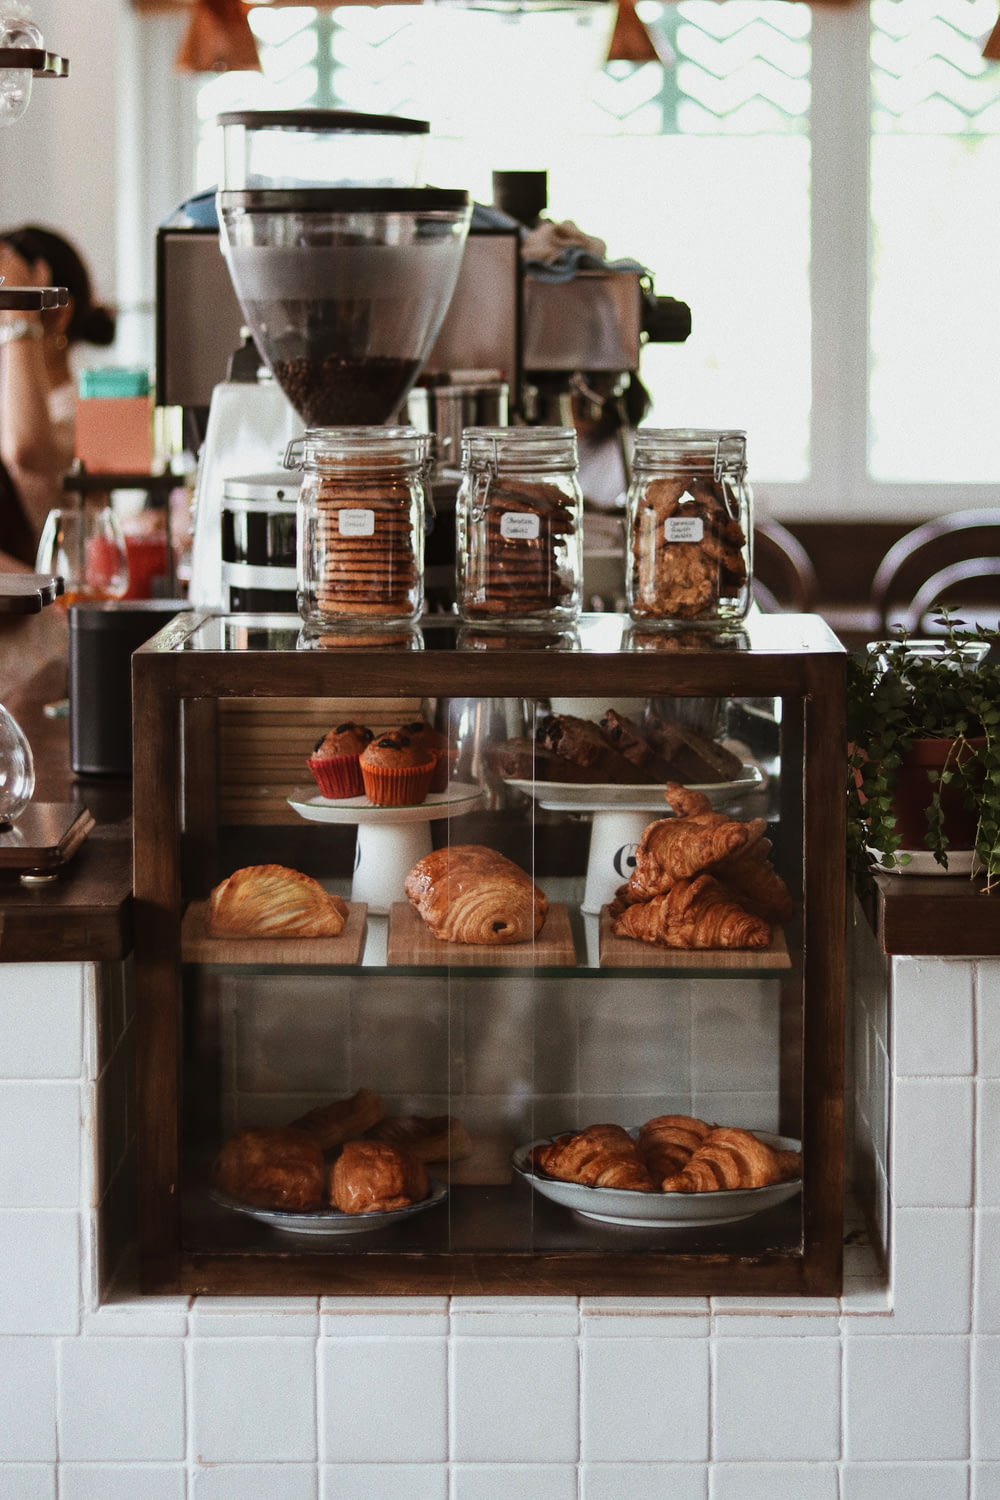 a bakery counter with pastries and coffee machines